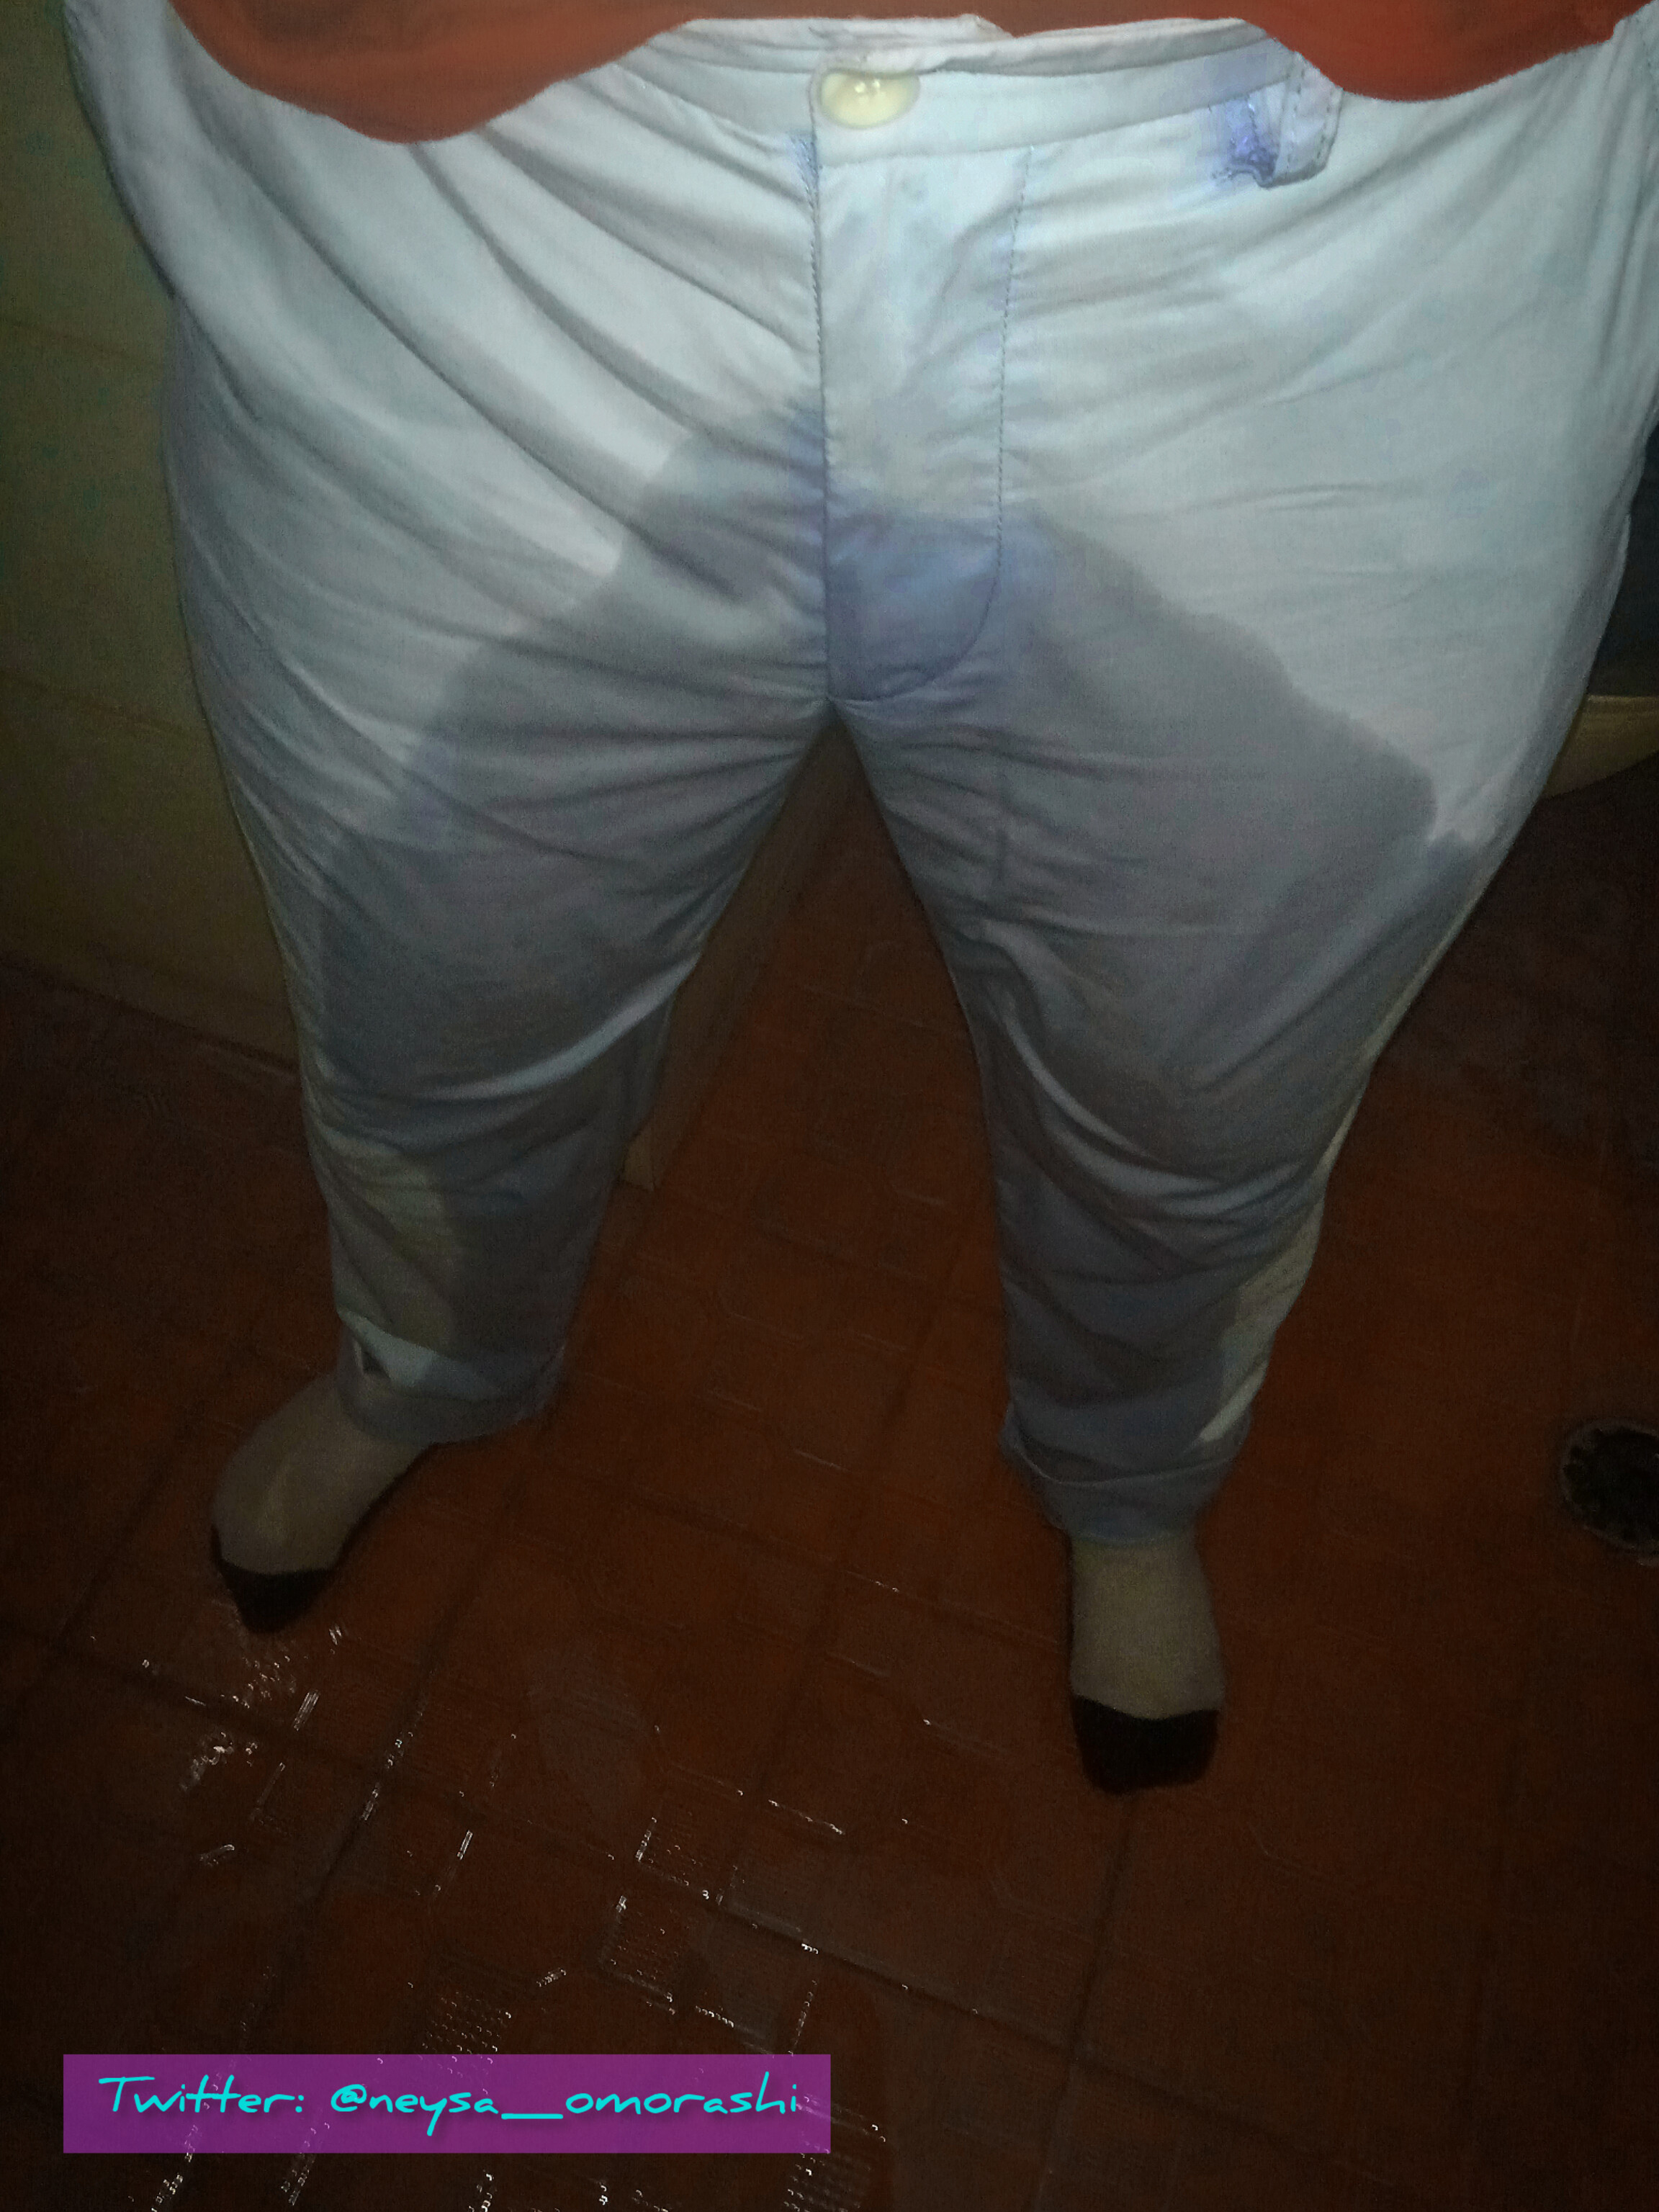 Indonesian girl pee her pants after work